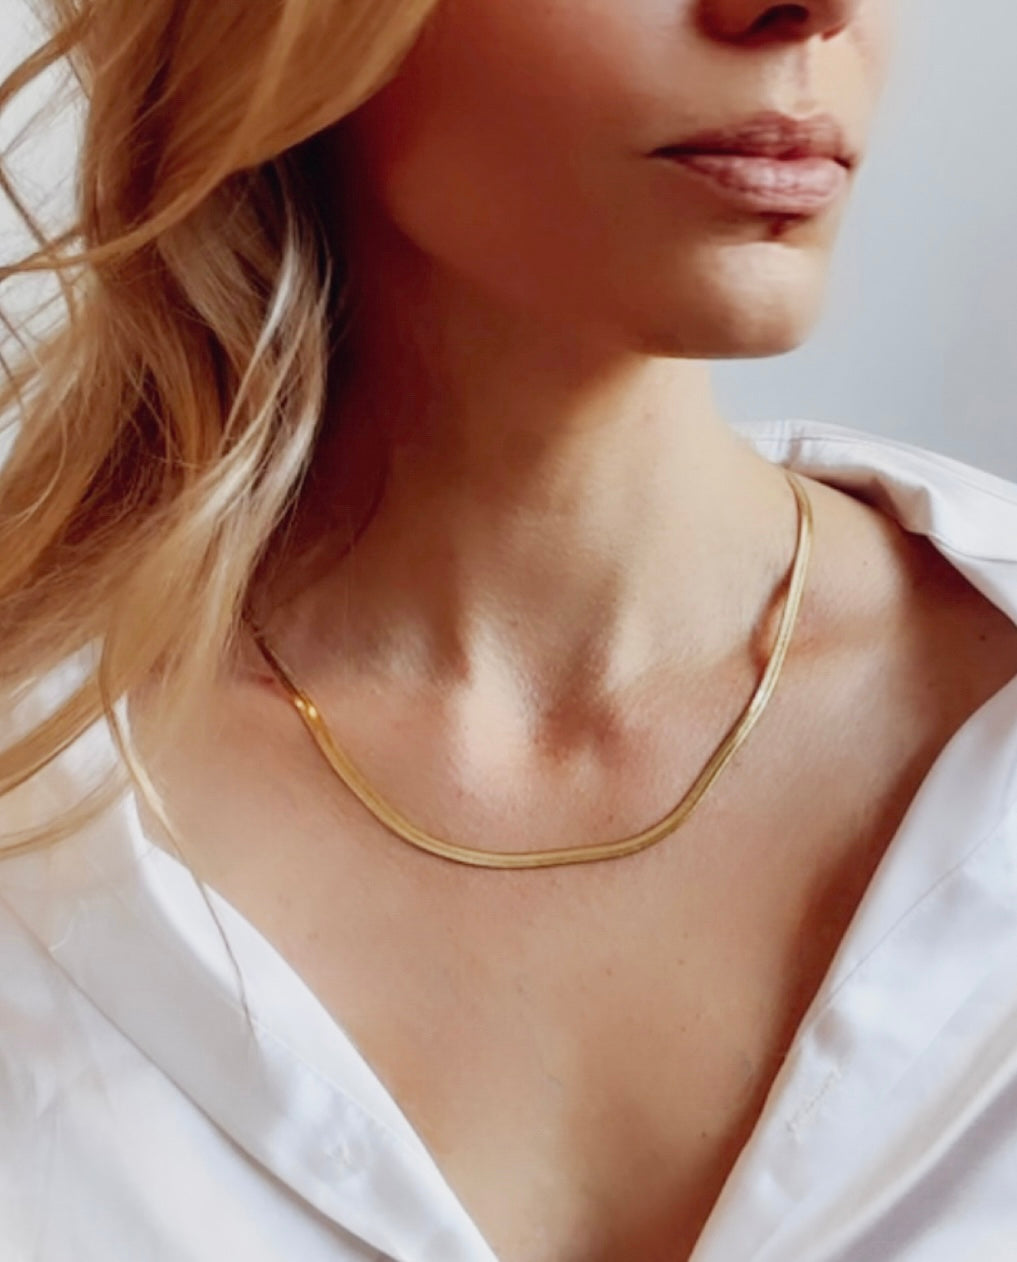 Introducing the Chloe Necklace, a stunning herringbone design meticulously crafted in your choice of sterling silver or elegantly plated with 18k gold. 